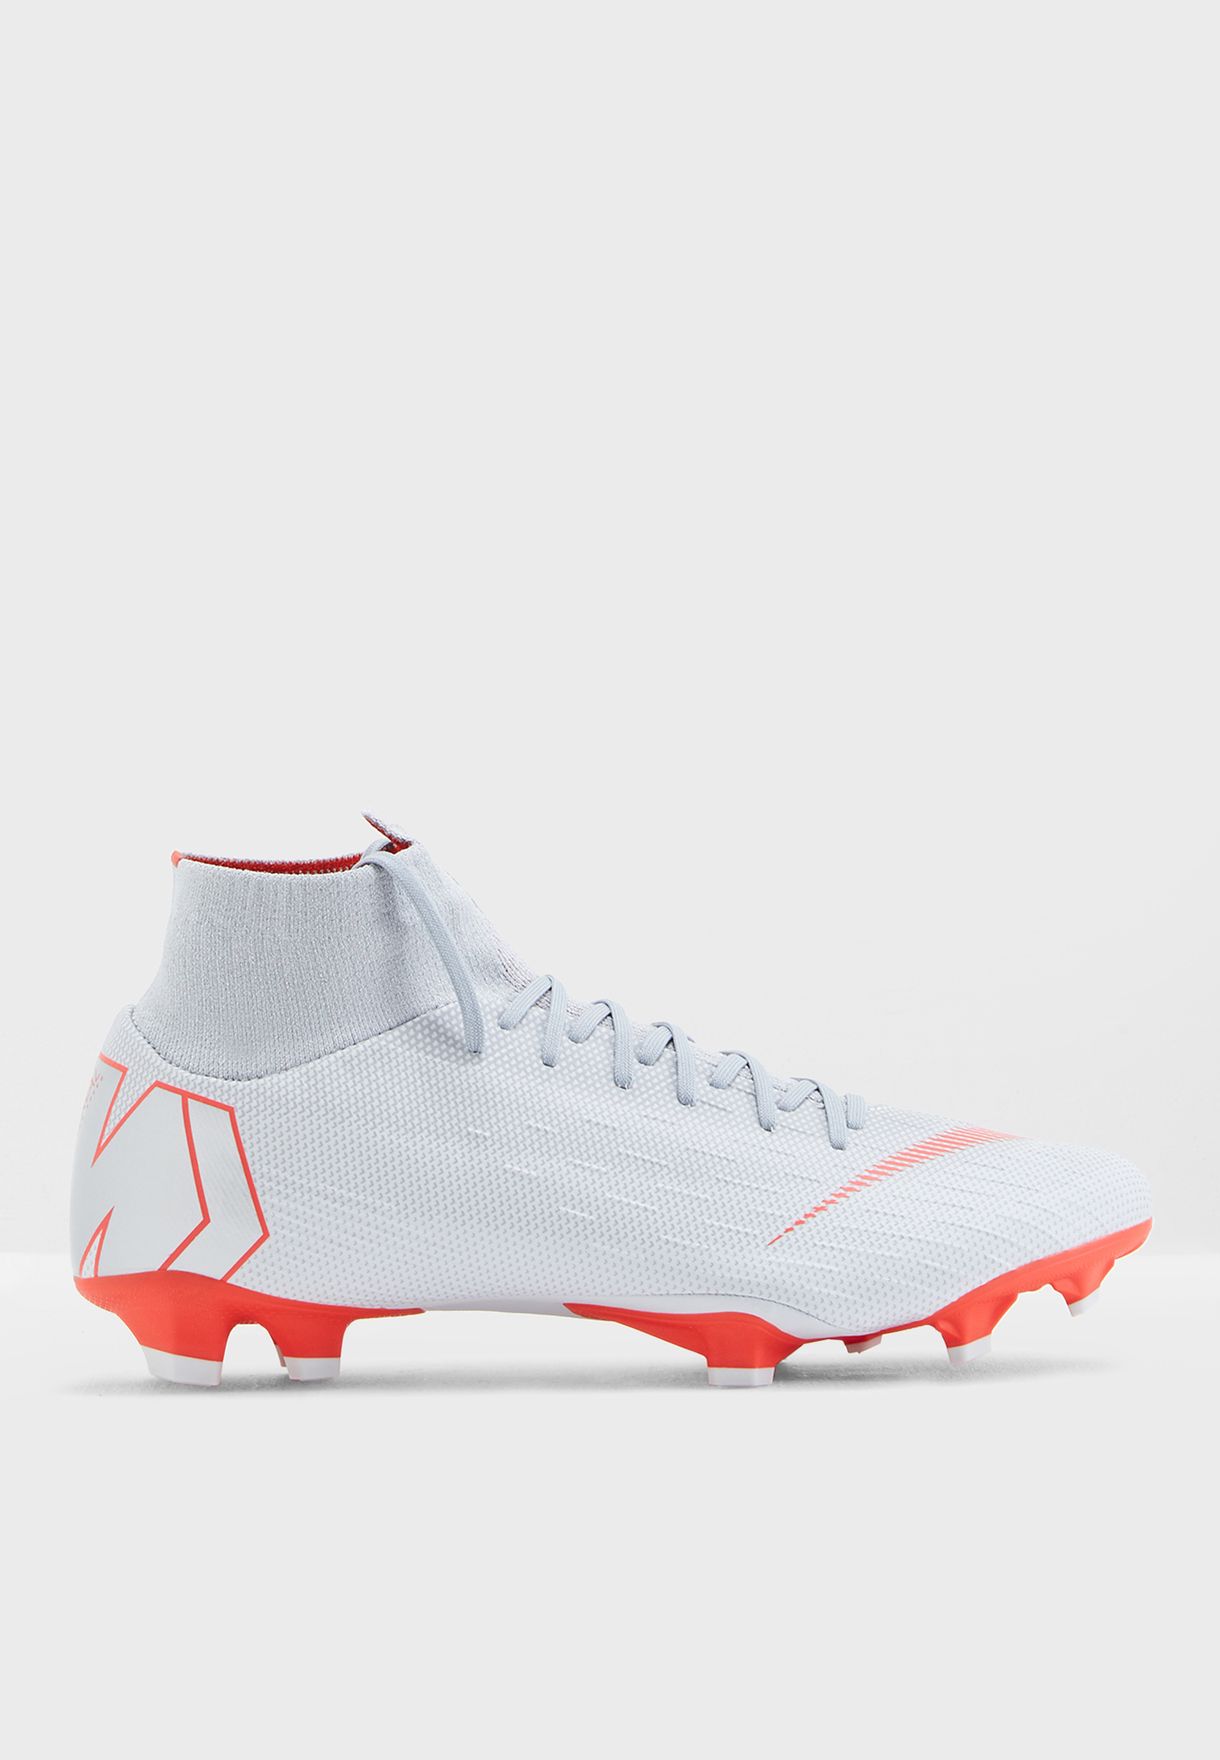 Nike Mercurial Superfly VI Pro FG Nike Brand Products.